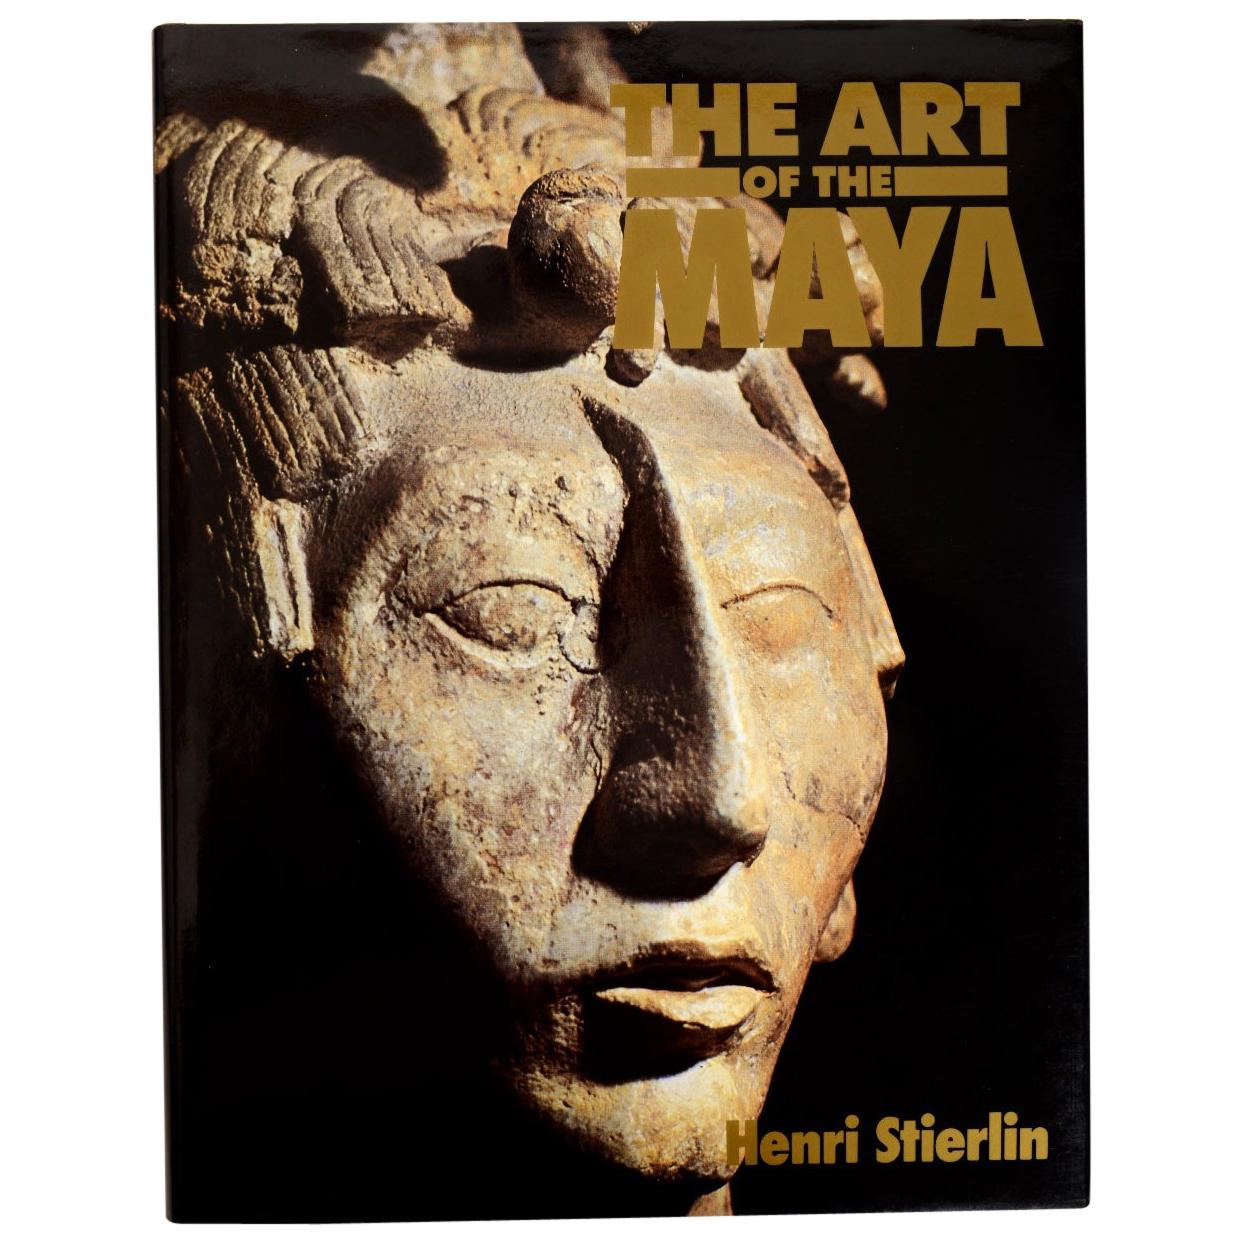 The Art of the Maya from the Olmecs to the Toltec-Maya by Henr Stierlin, 1st Ed